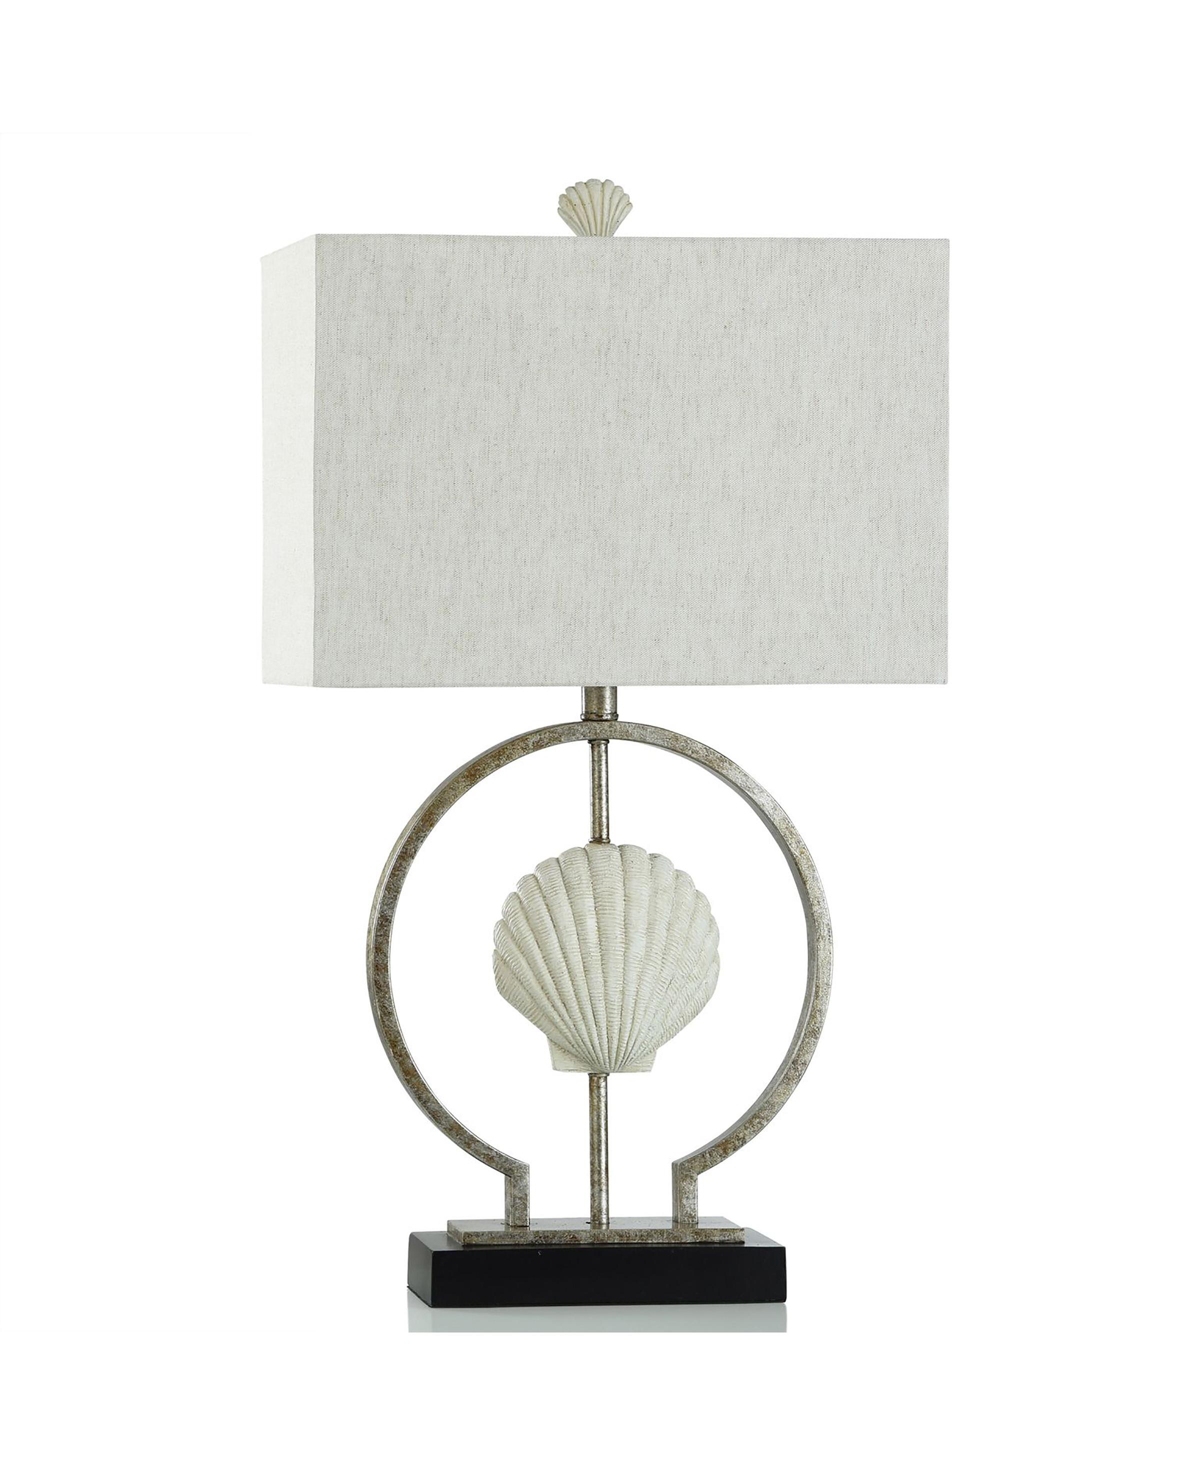 Stylecraft Home Collection 30.25" Aleutian Style Floated Seashell Rustic Coastal Table Lamp In Distressed Metal,cream,black Steel